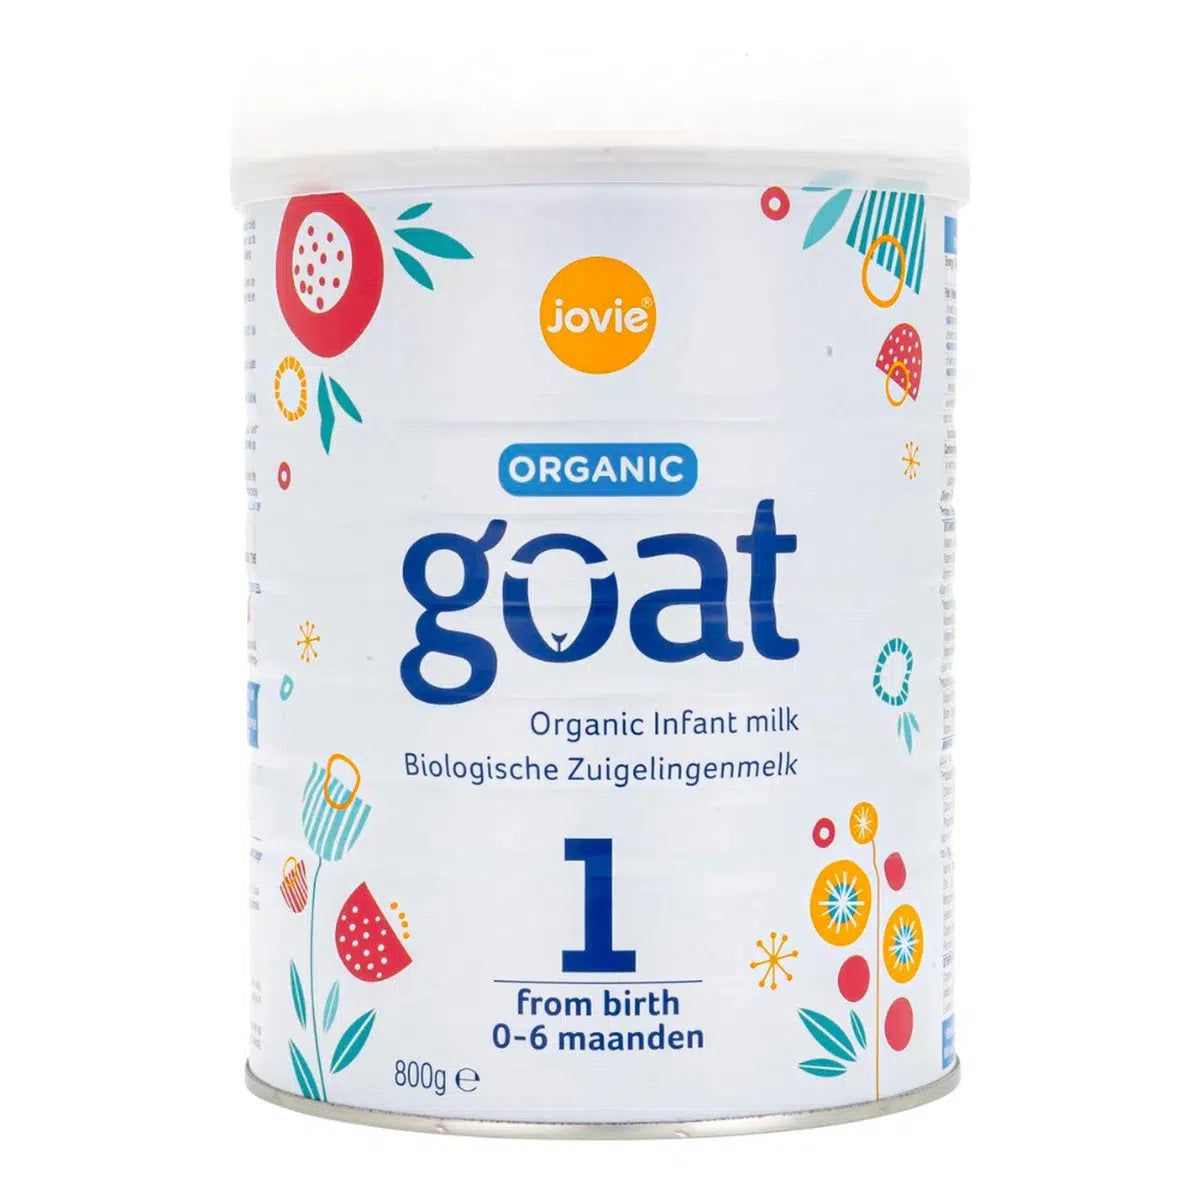 Nannycare® Goat Stage 3 🍼 Save up to $75 on first order❣️